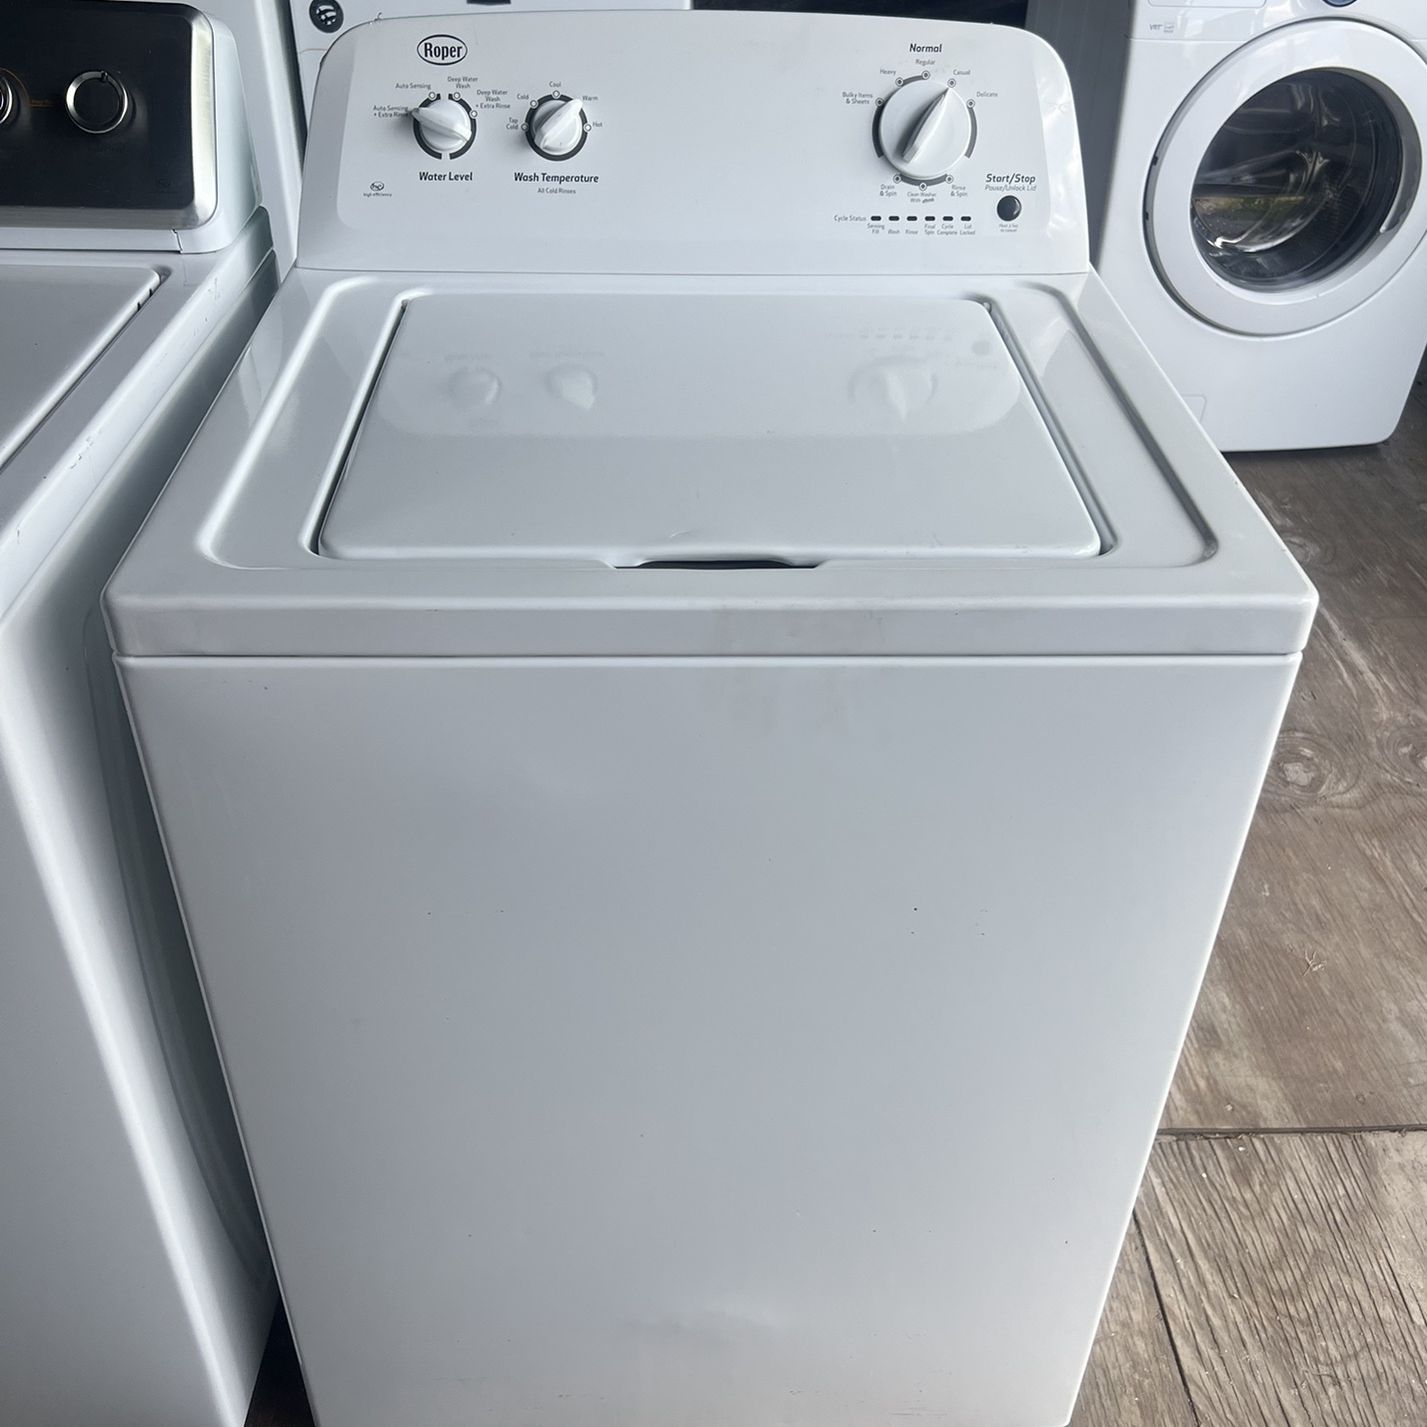 Ropper Single Washer   60 day warranty/ Located at:📍5415 Carmack Rd Tampa Fl 33610📍